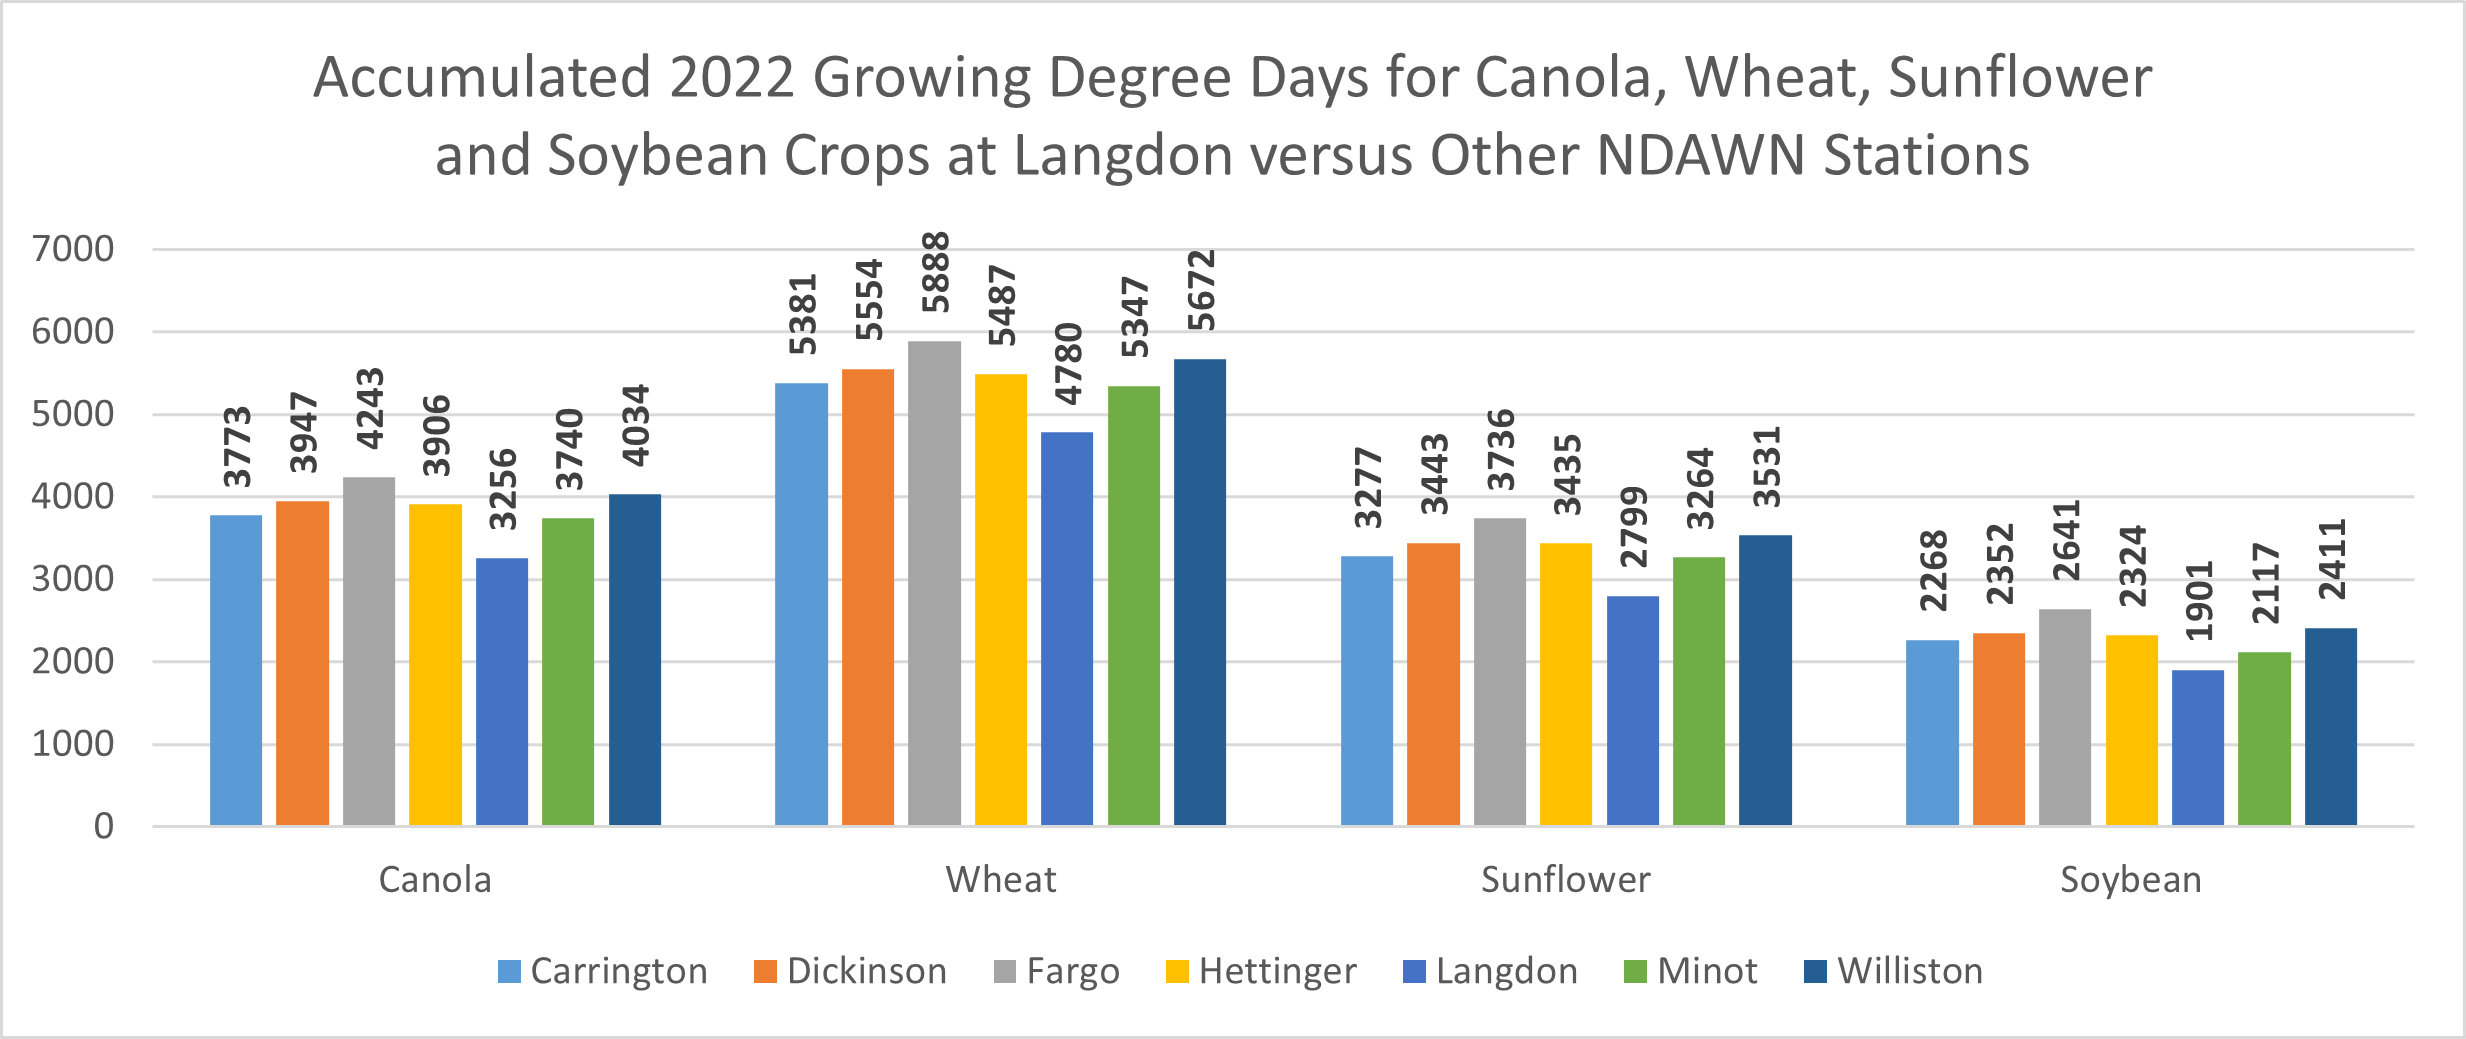 Chart displaying 2022 accumulated growing degree days for canola, wheat, sunflower and soybean at Langdon and other NDAWN Stations.